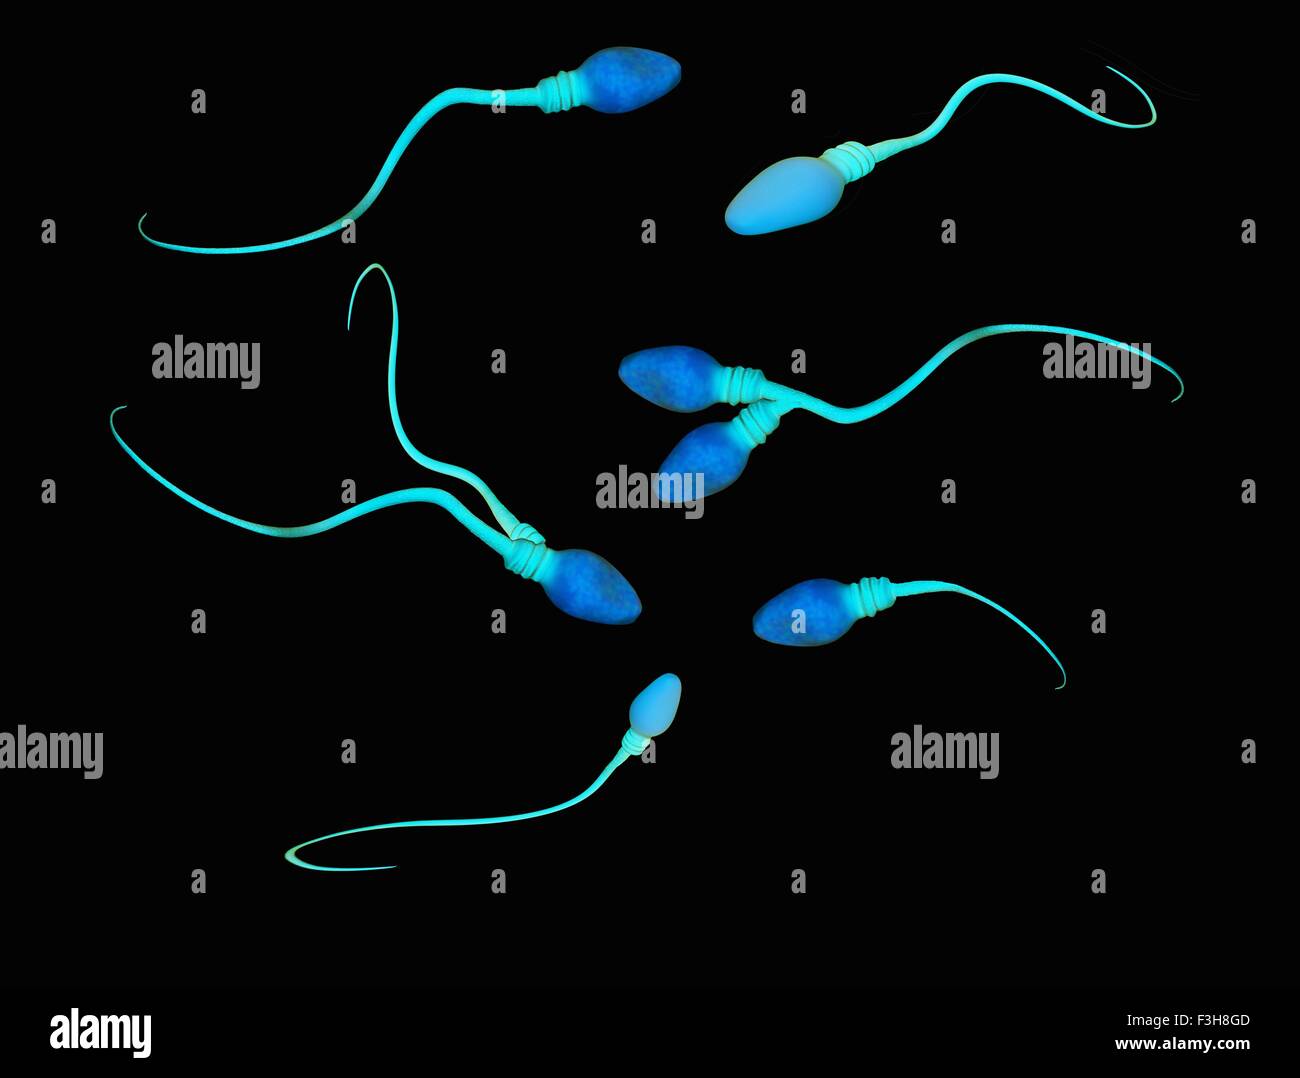 Illustration of abnormalities and deformities of human sperm cells Stock Photo